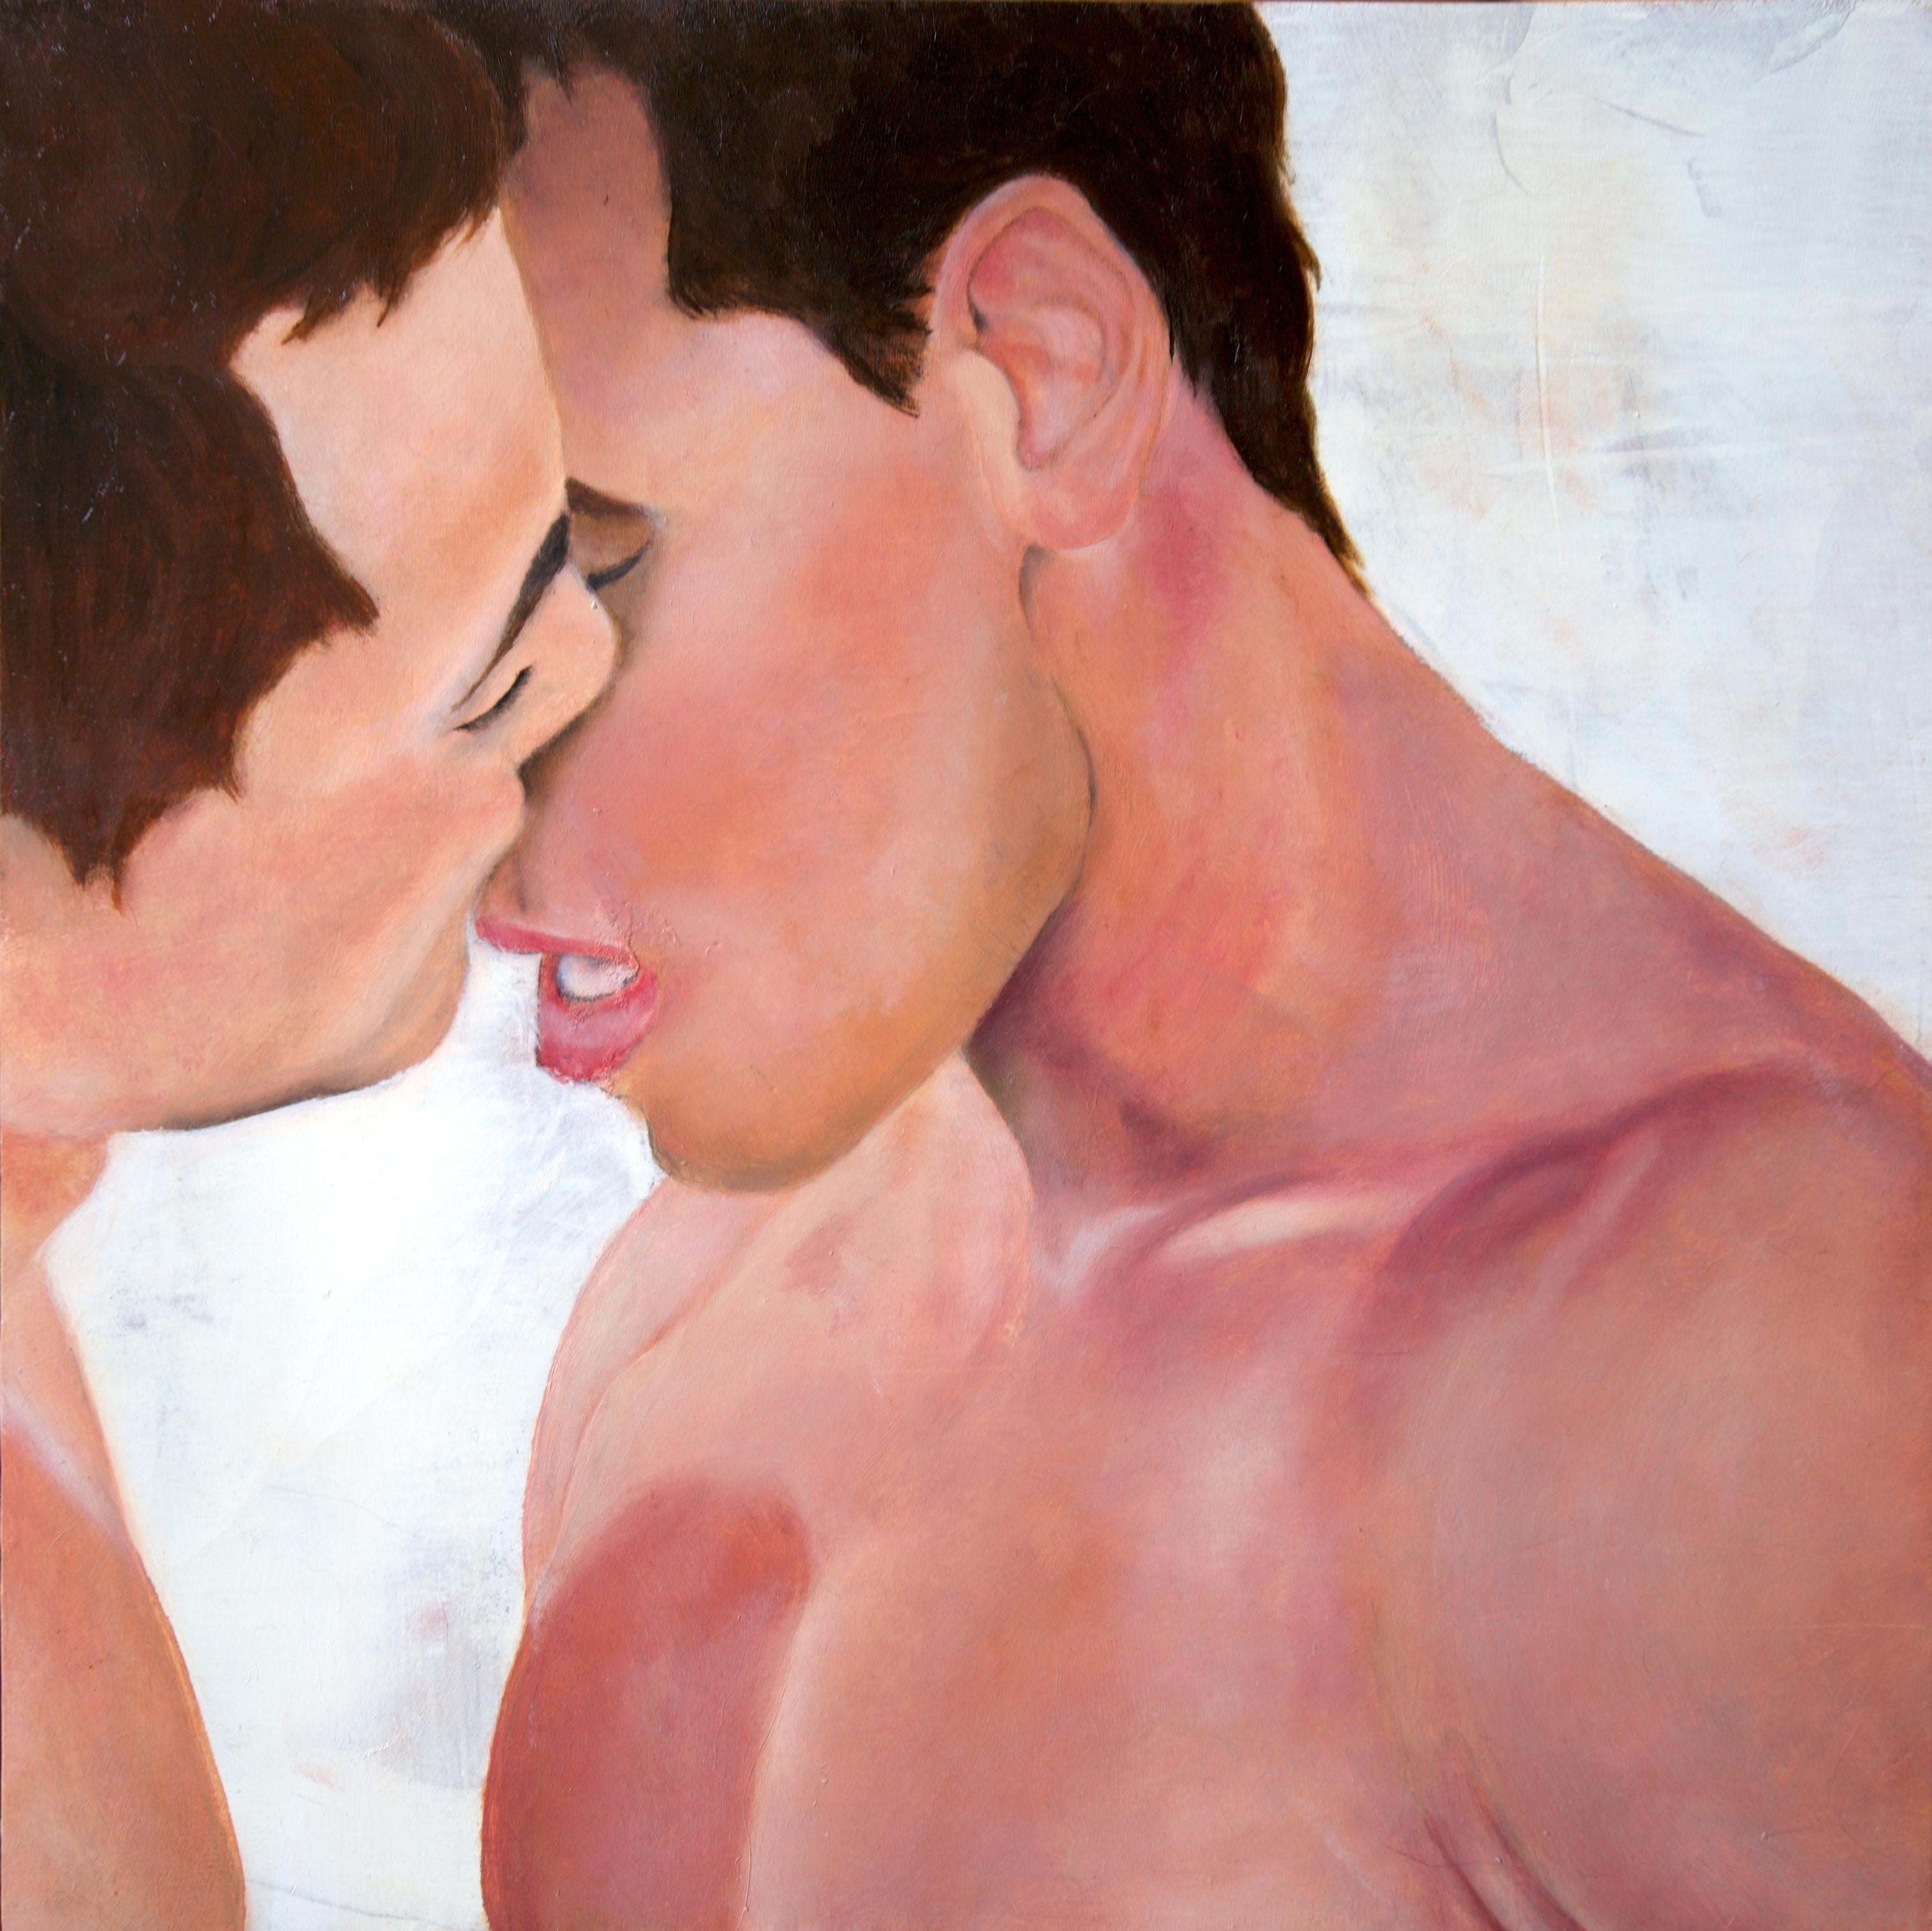 Rick Sindt Figurative Painting - Occasionally There Would Be One - Intimate Painting of a Couple, Original Oil